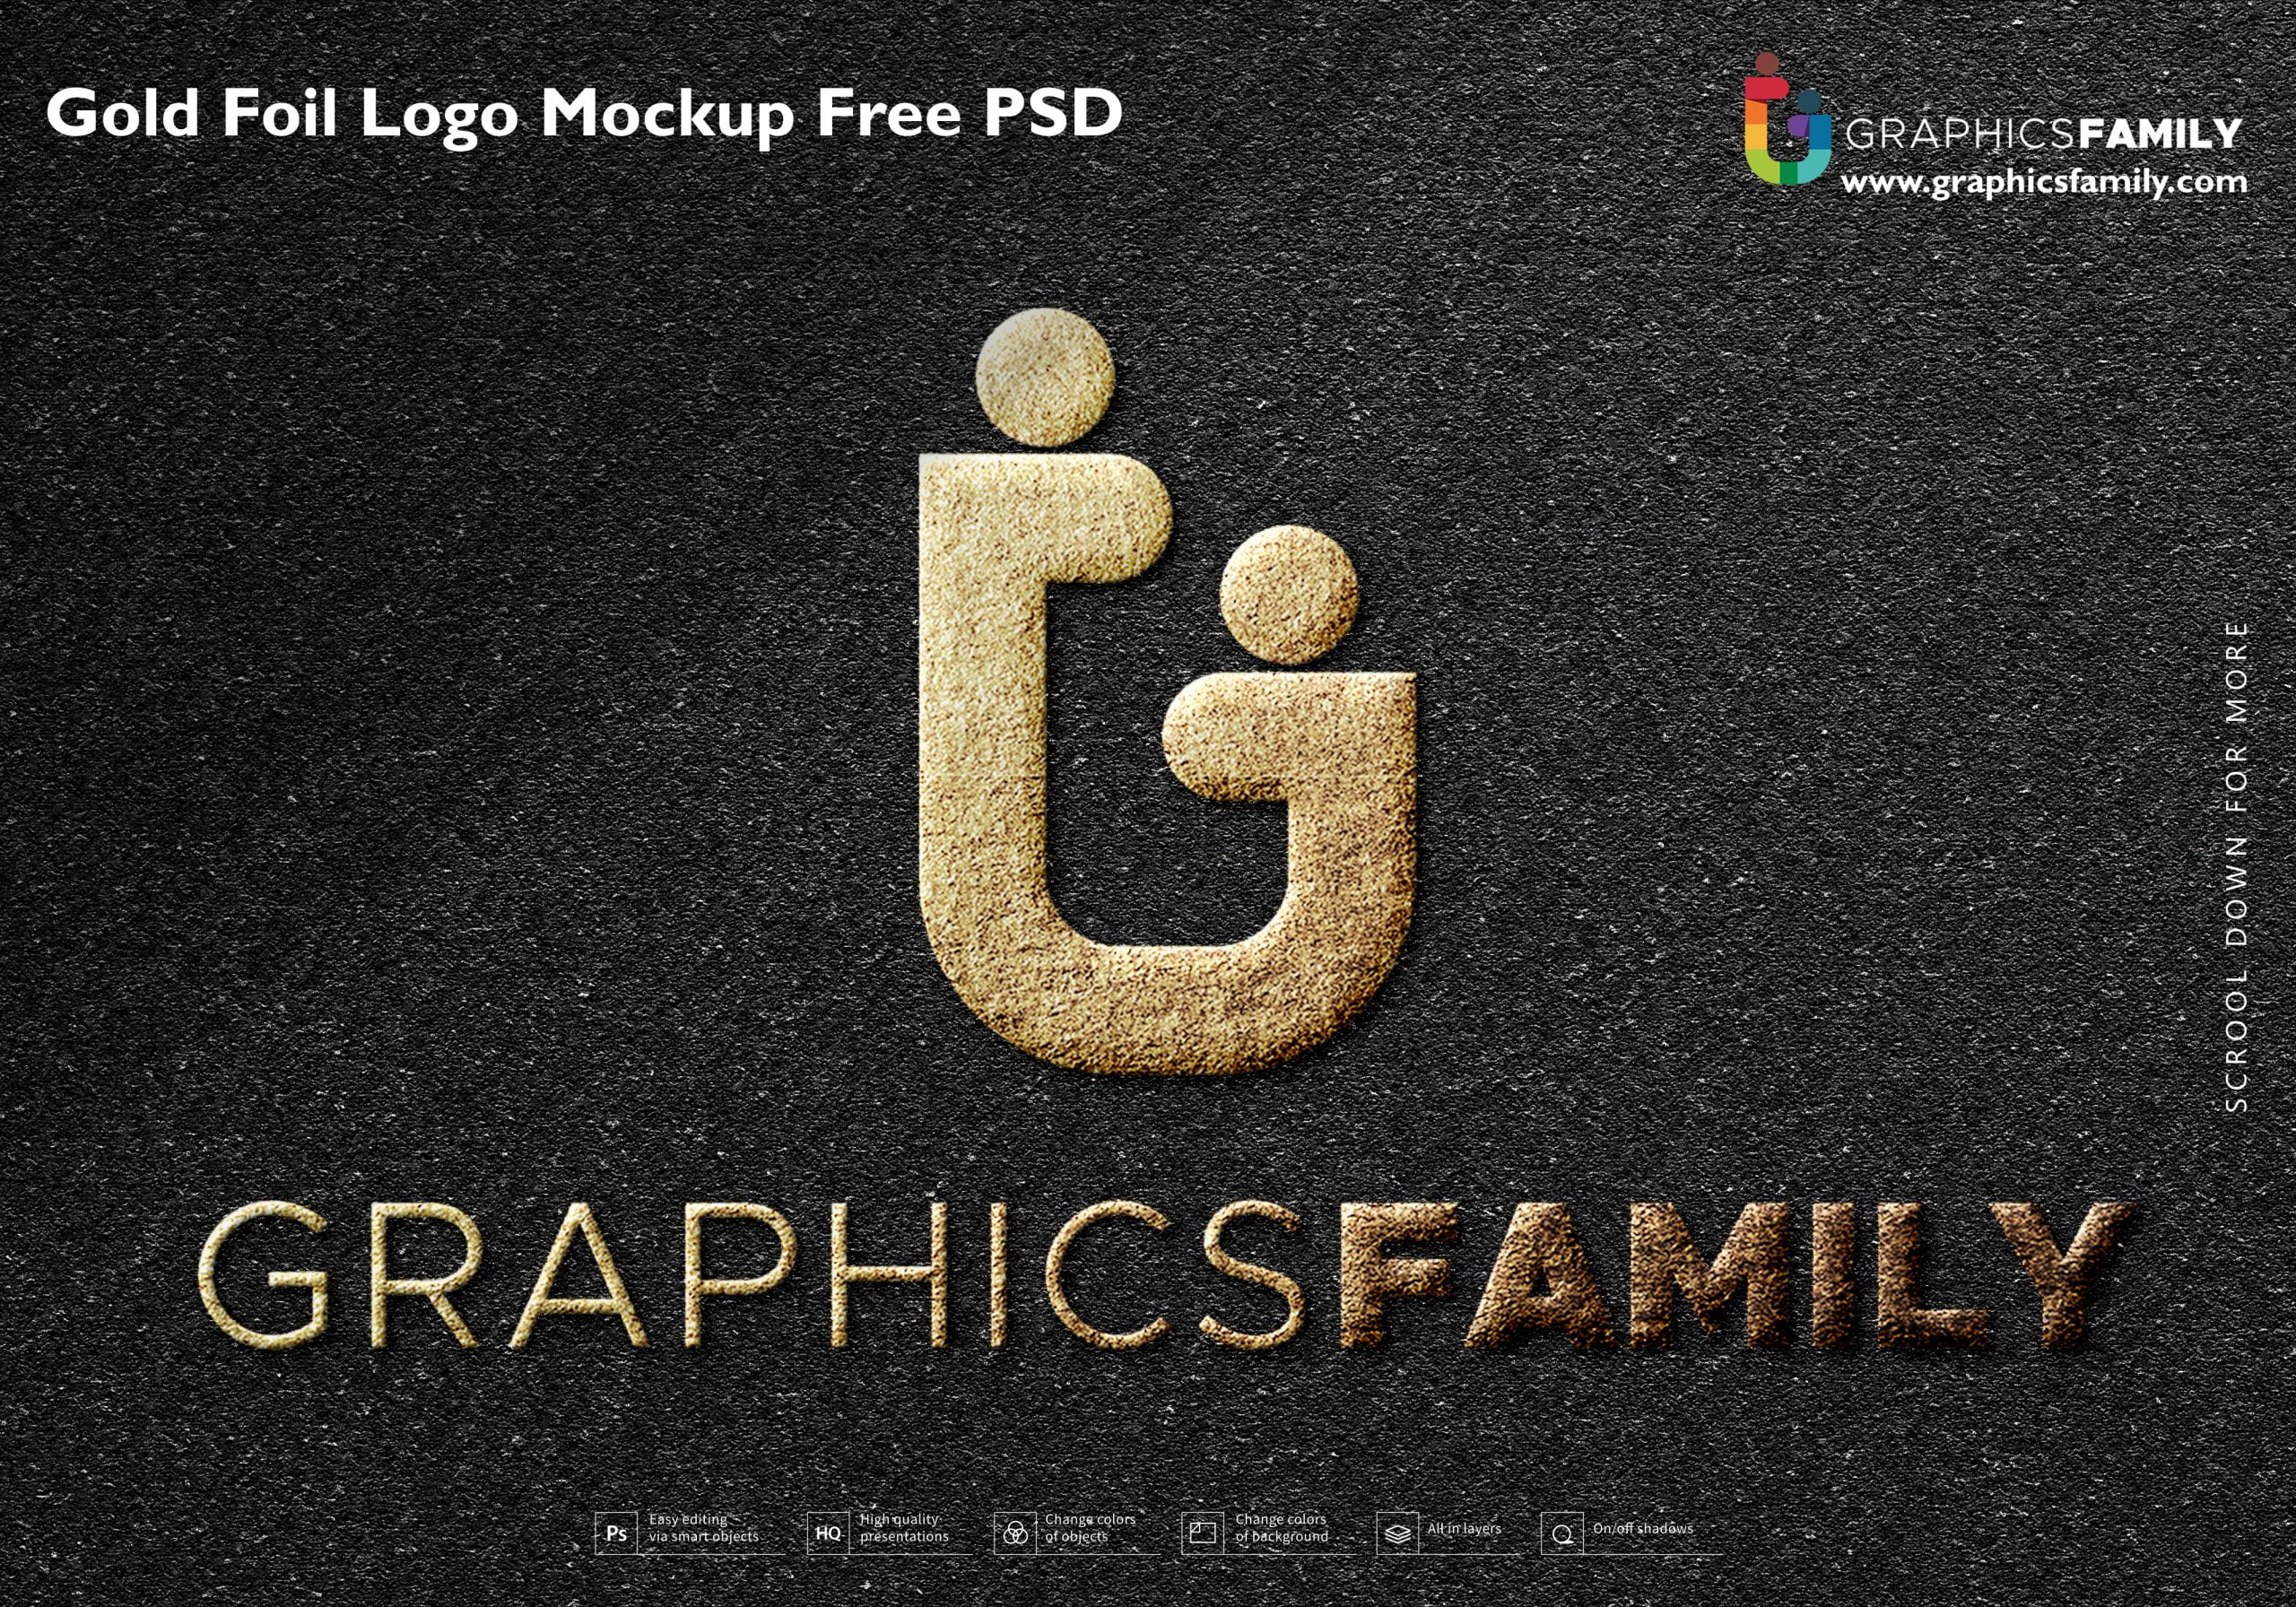 Gold Foil Logo Mockup Free PSD - GraphicsFamily